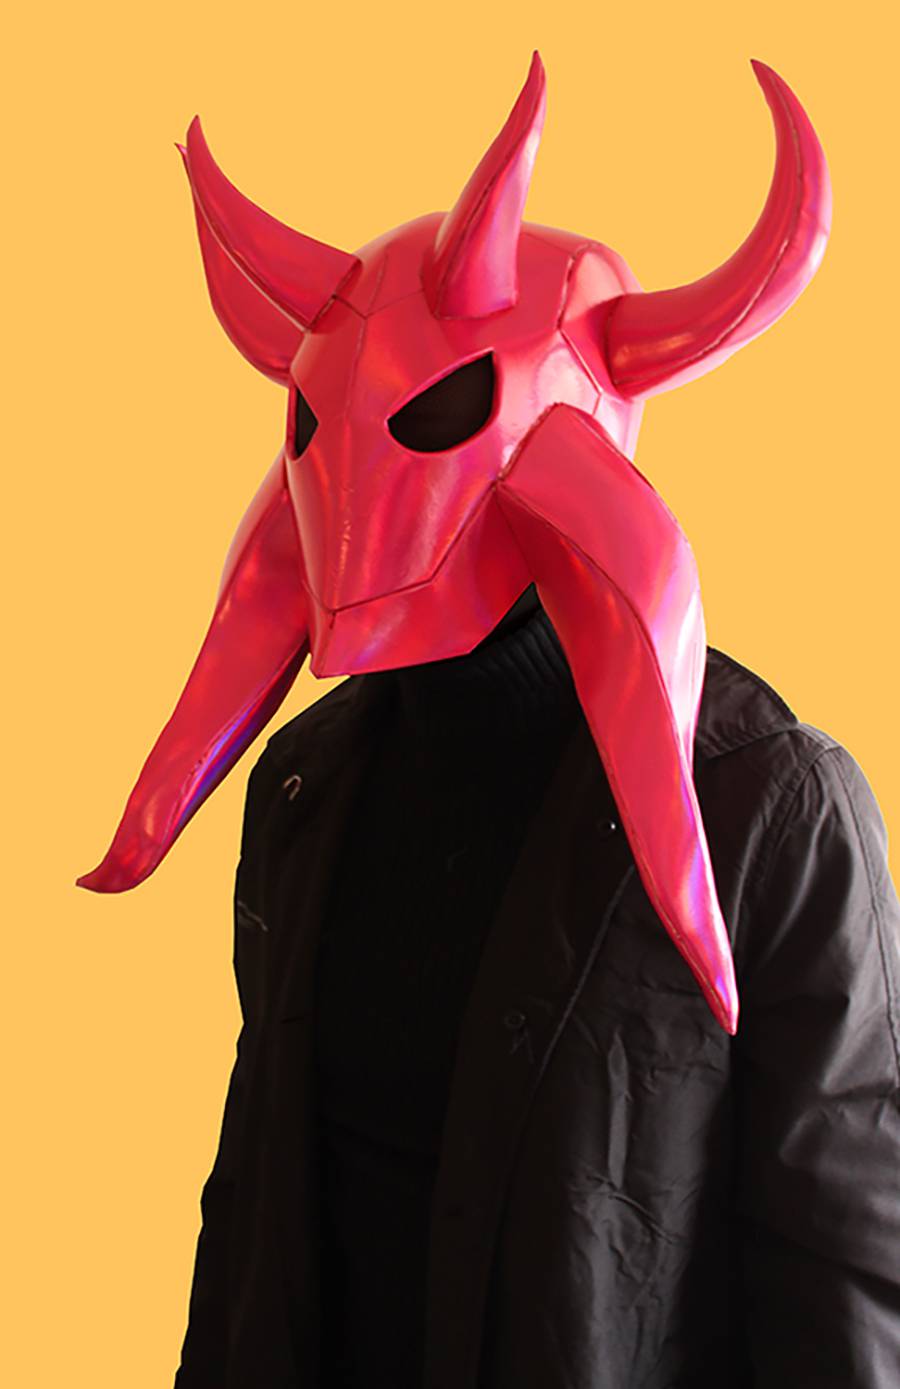 Red helmet with 6 protruding horns made of mesh fabric, and red holographic stretch vinyl fabric.